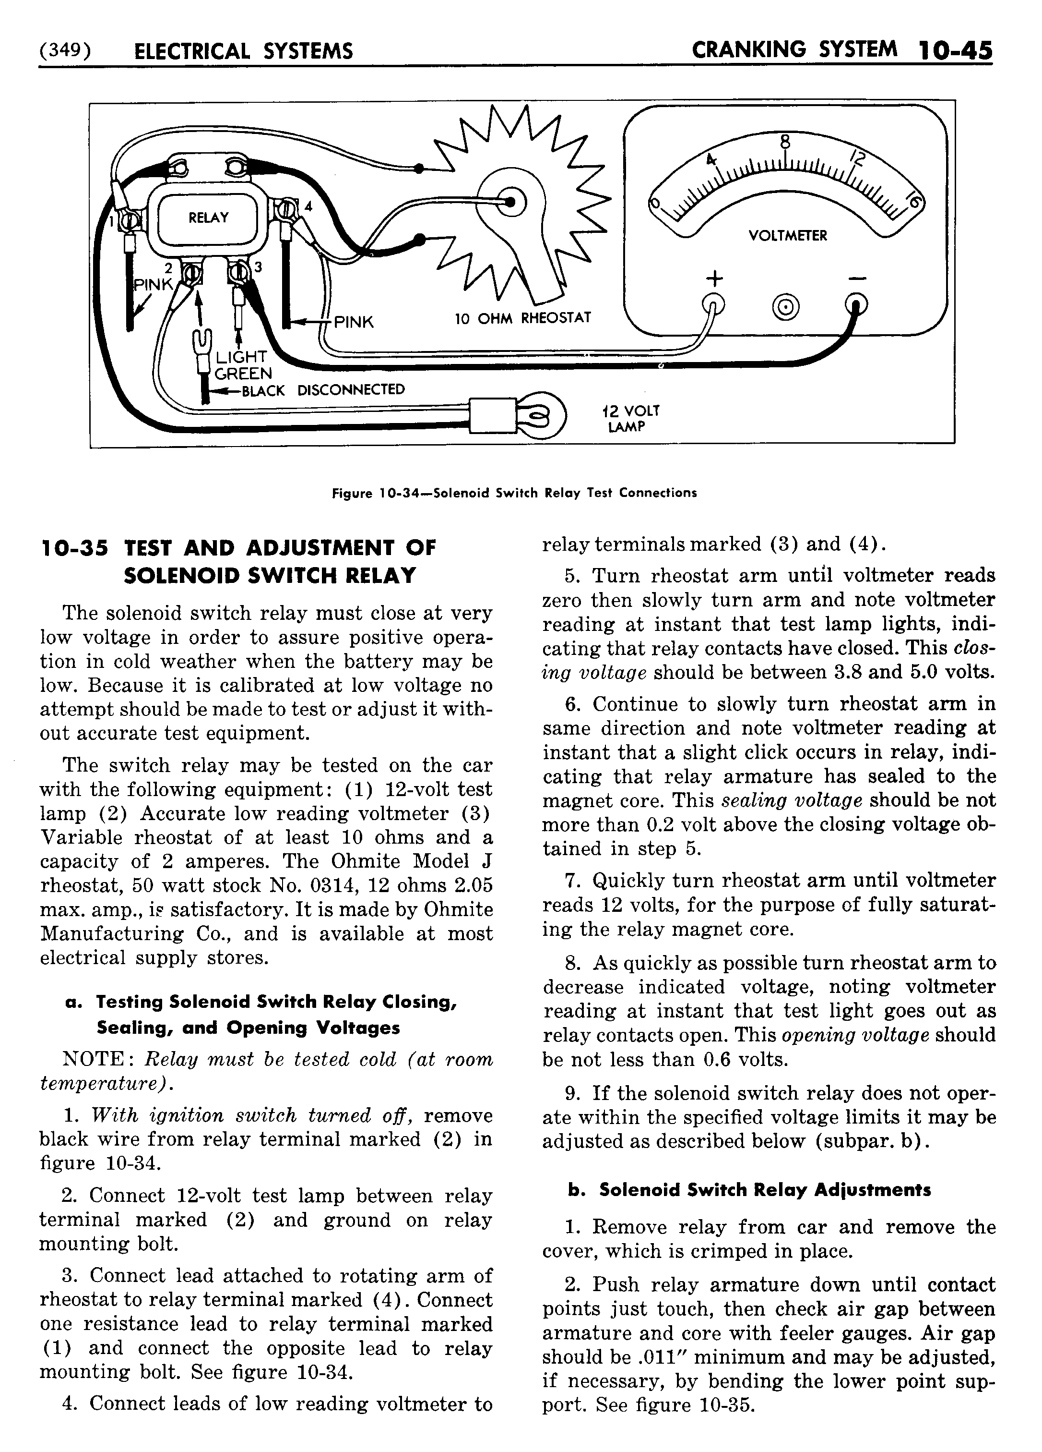 n_11 1955 Buick Shop Manual - Electrical Systems-045-045.jpg